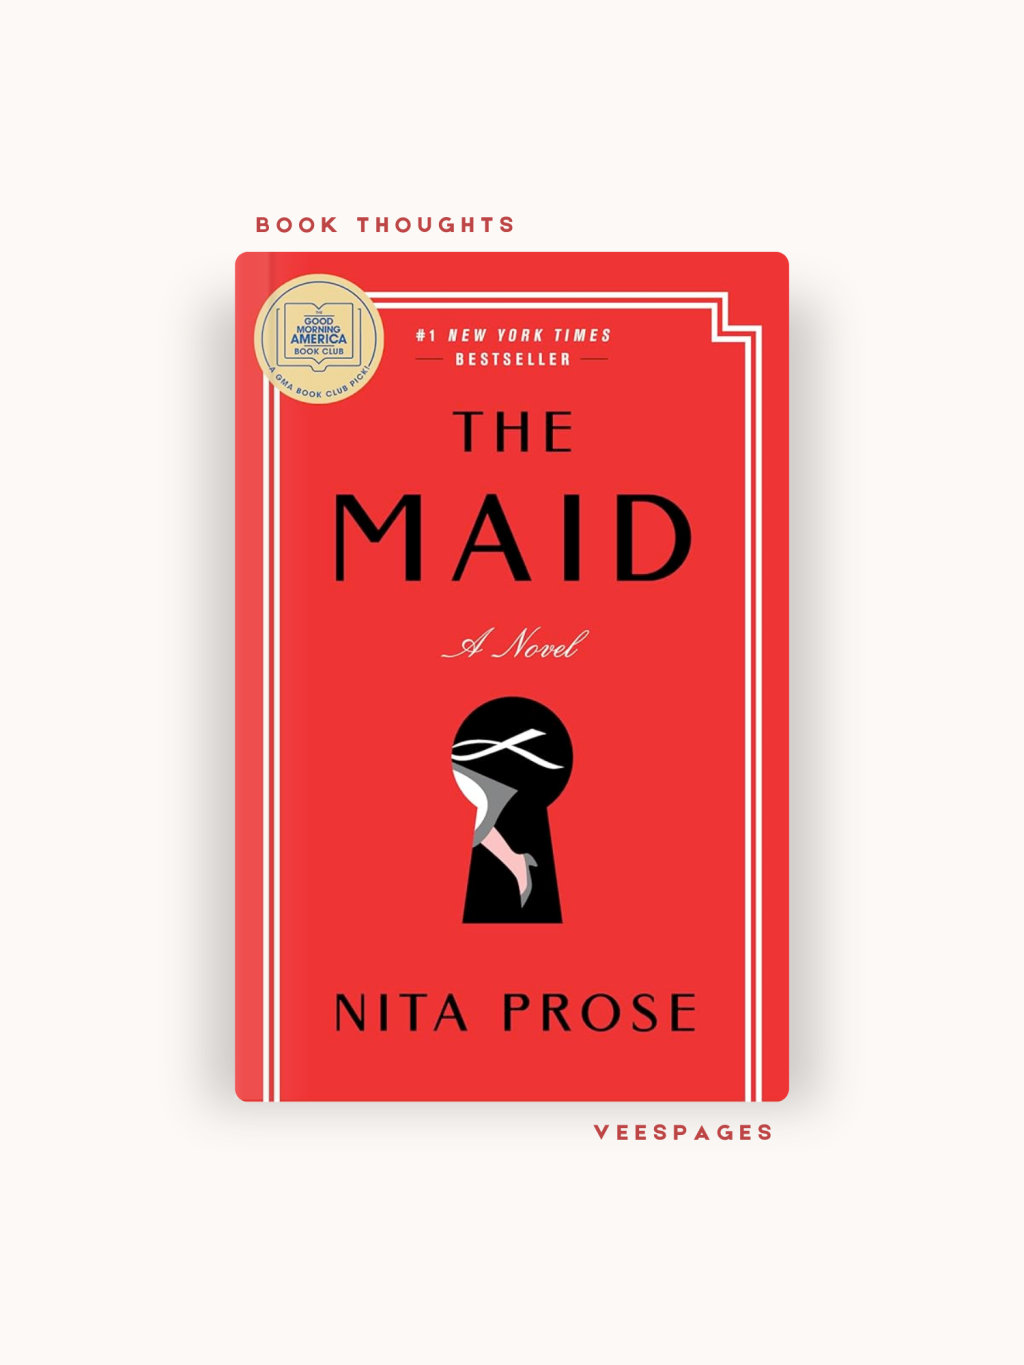 The Maid by Nita Prose ⏤ Wrong Place Wrong Time for An Innocent Maid